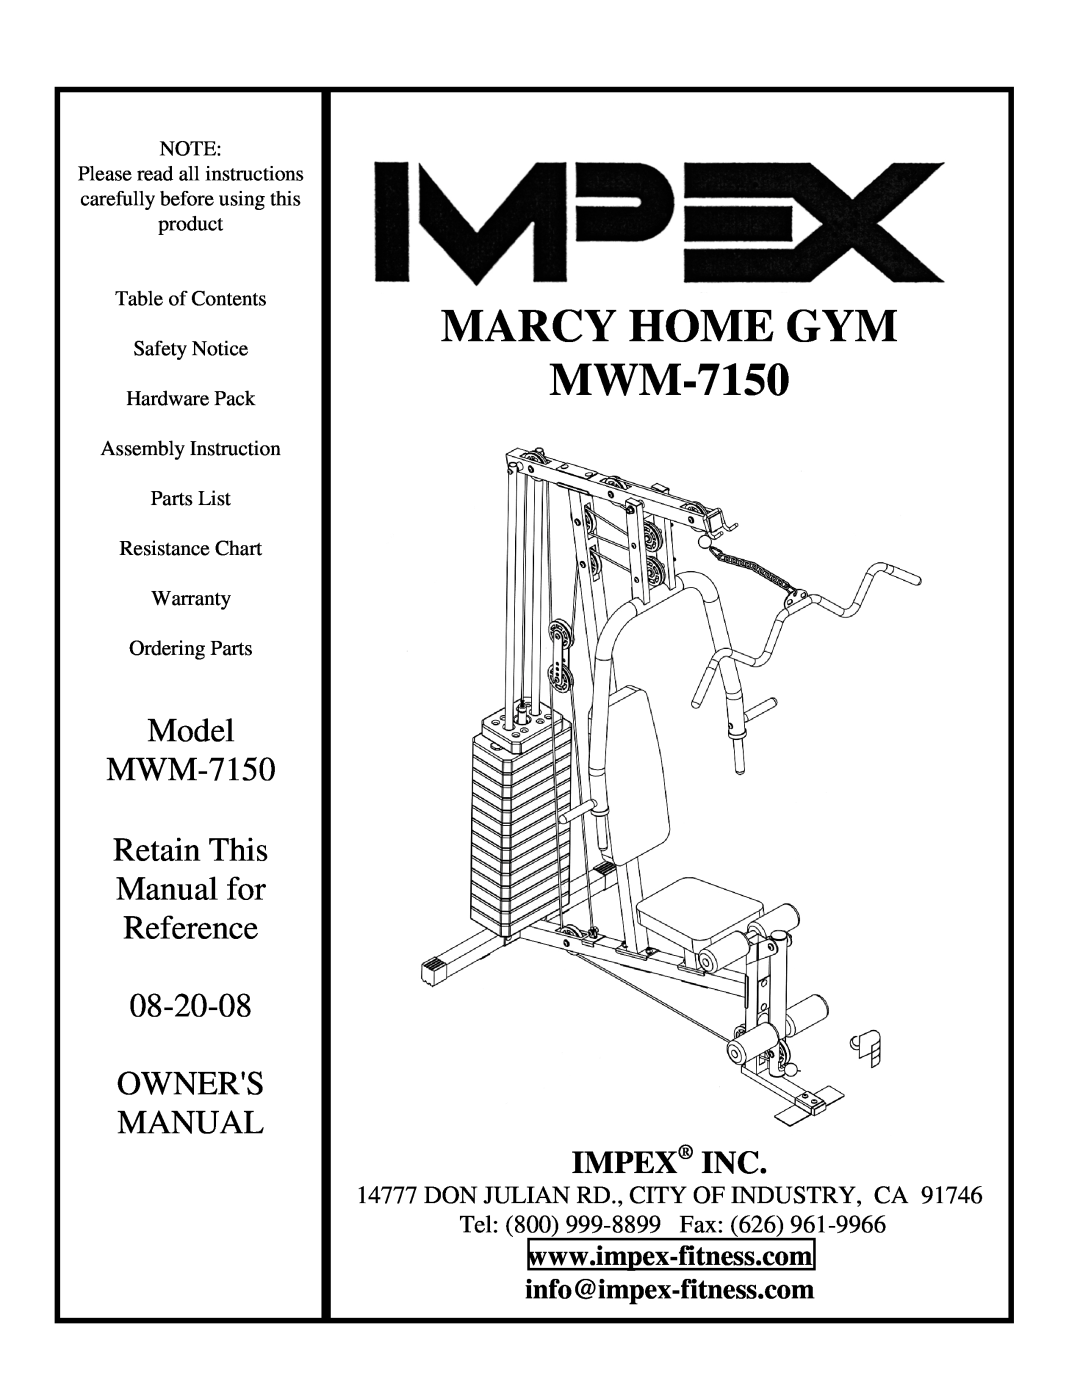 Impex MWM7150 manual info@impex-fitness.com, Marcy Home Gym, MWM-7150, Model, Retain This, Manual for, Reference, Owners 